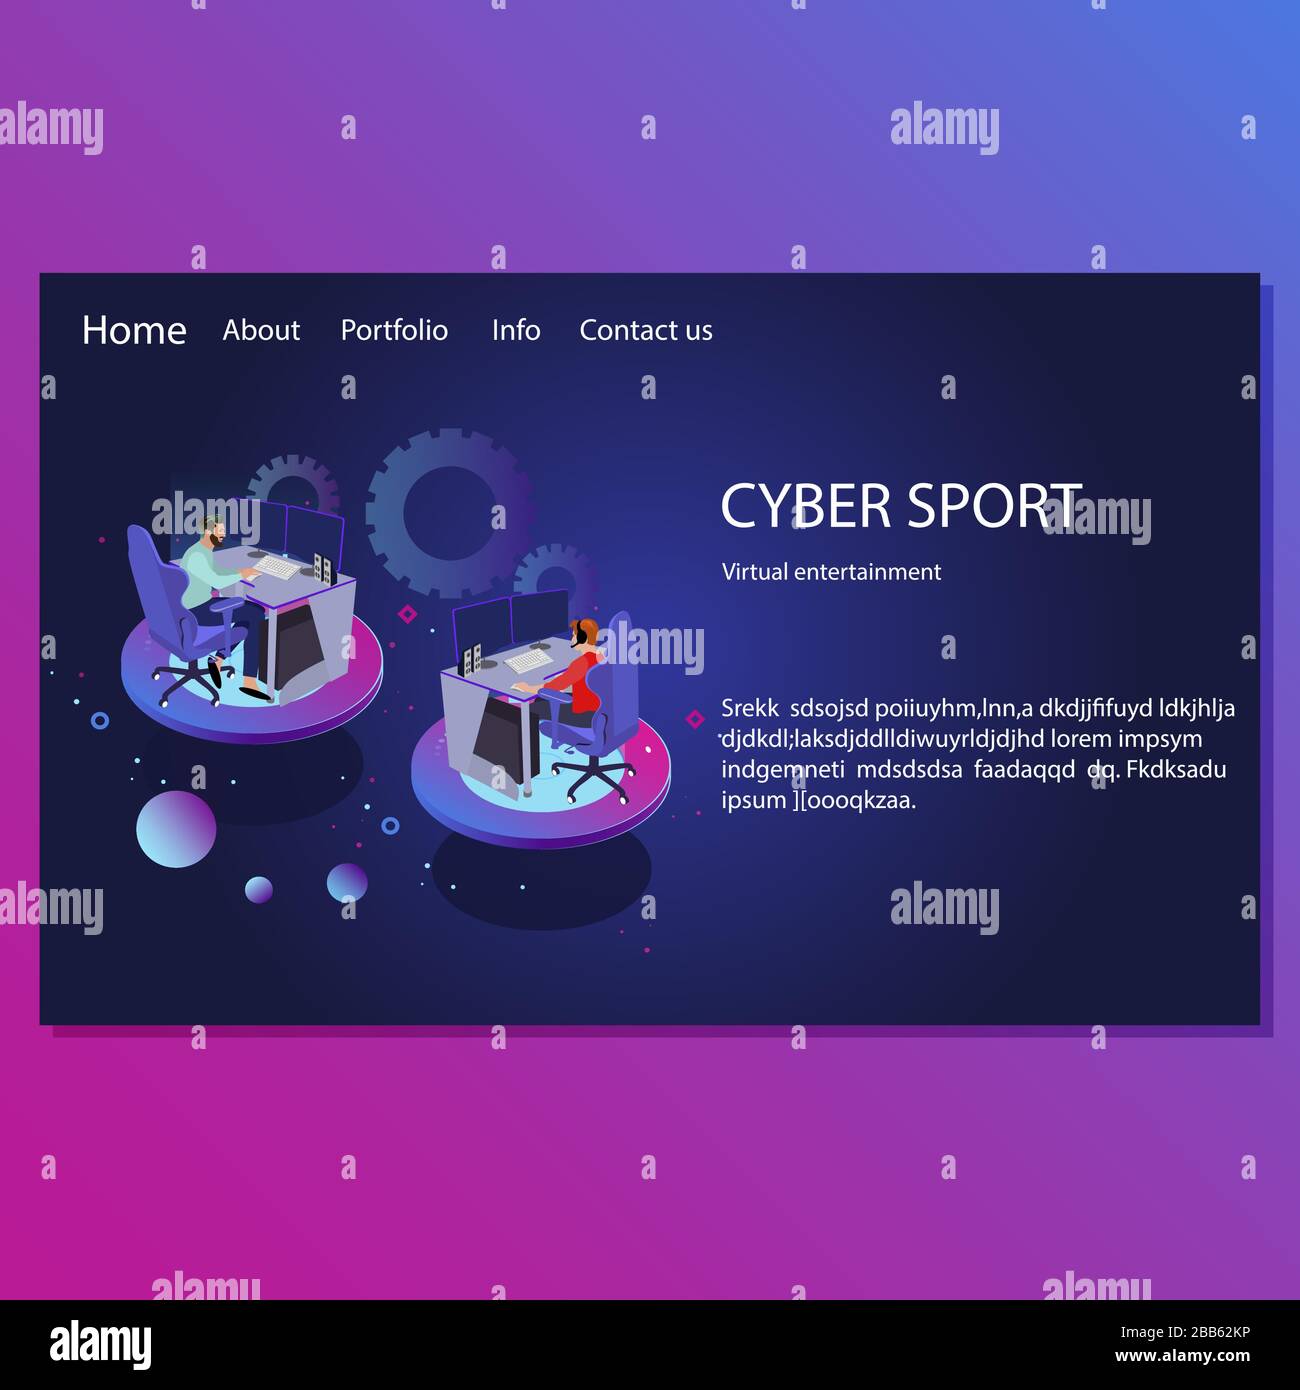 Cyber sport landing page. Virtual entertainment. Illustration multiplayer and cyber competition, gamer entertainment club website vector Stock Vector